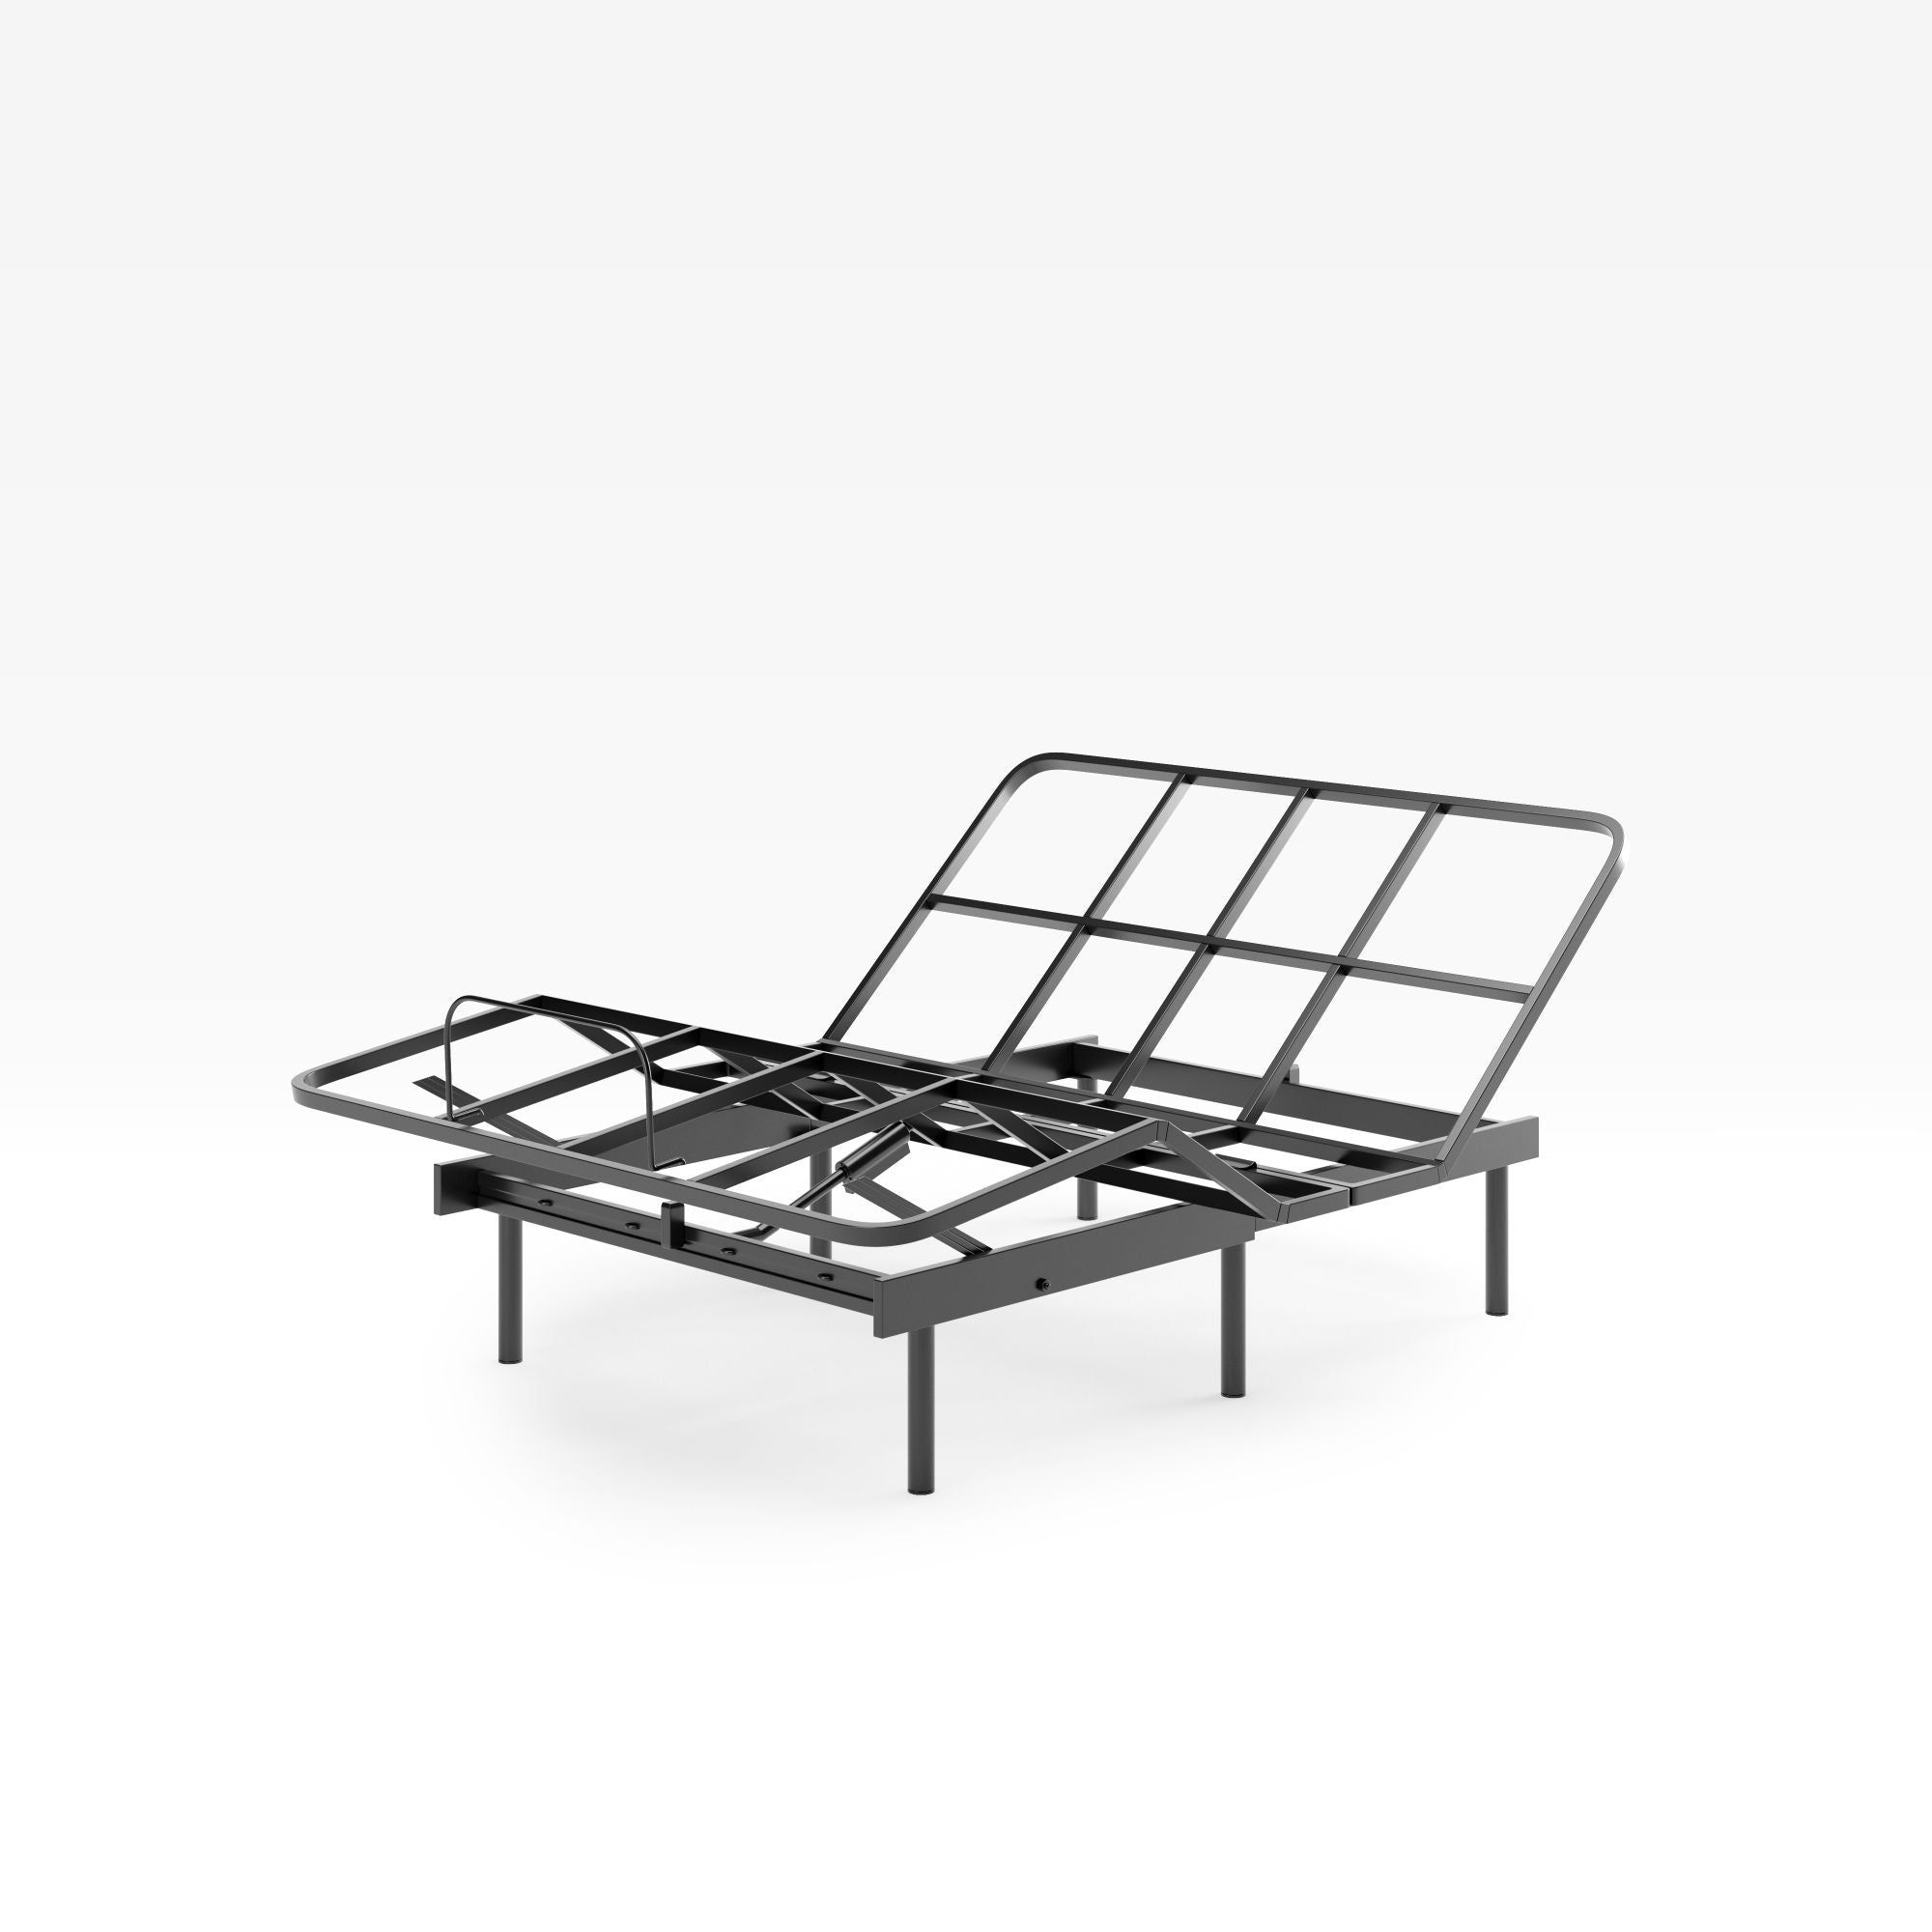 Adjustable Metal Bed Frame with Head and Foot Incline